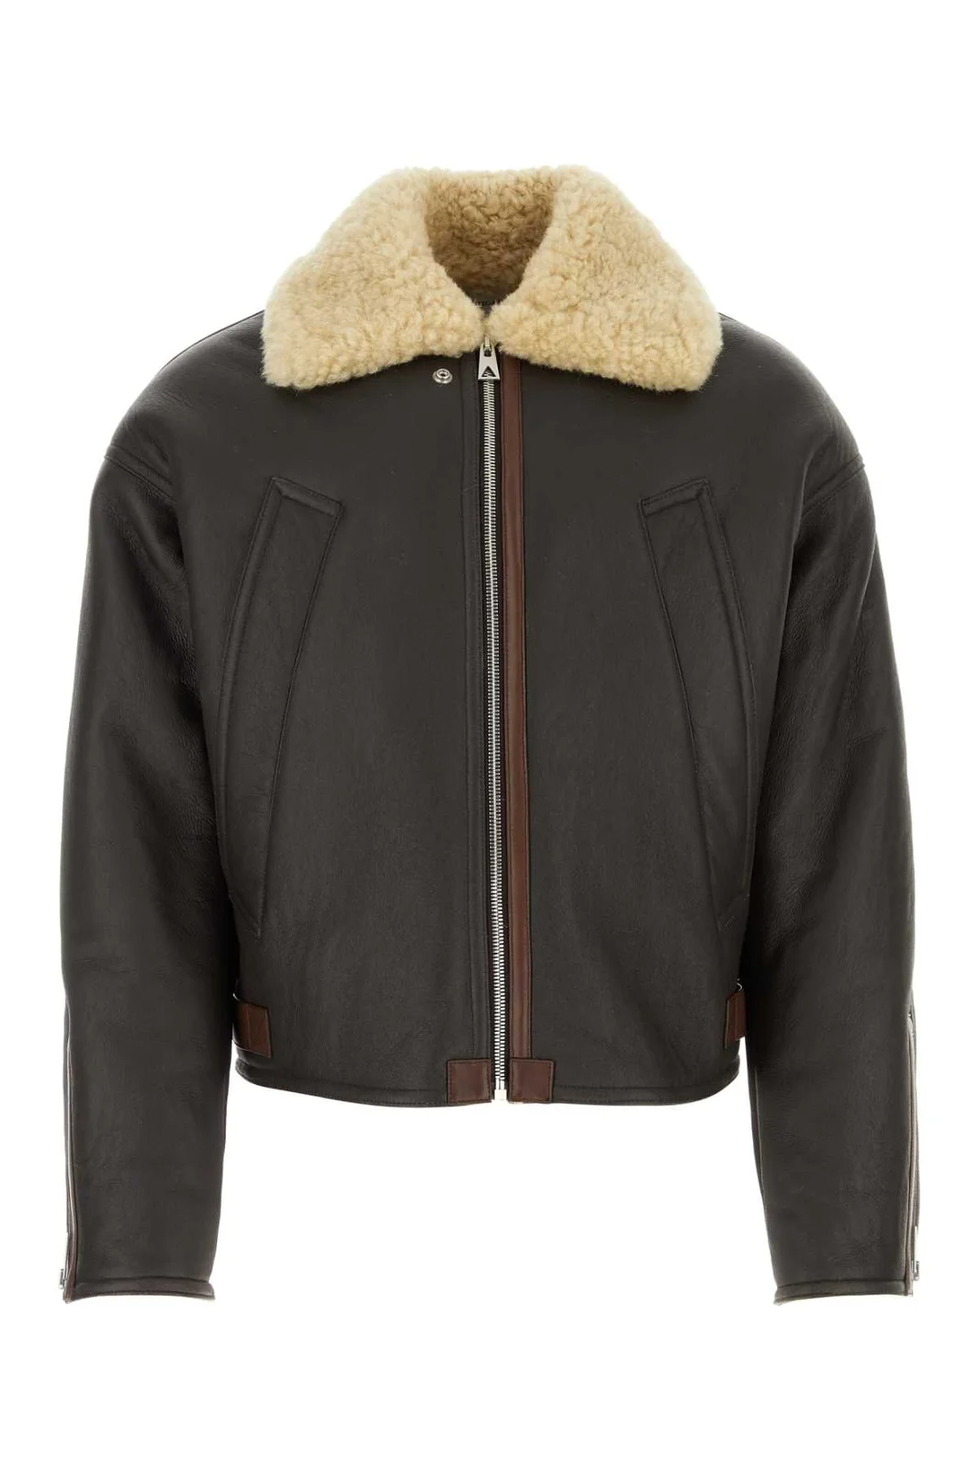 Auckland Shearling Jacket